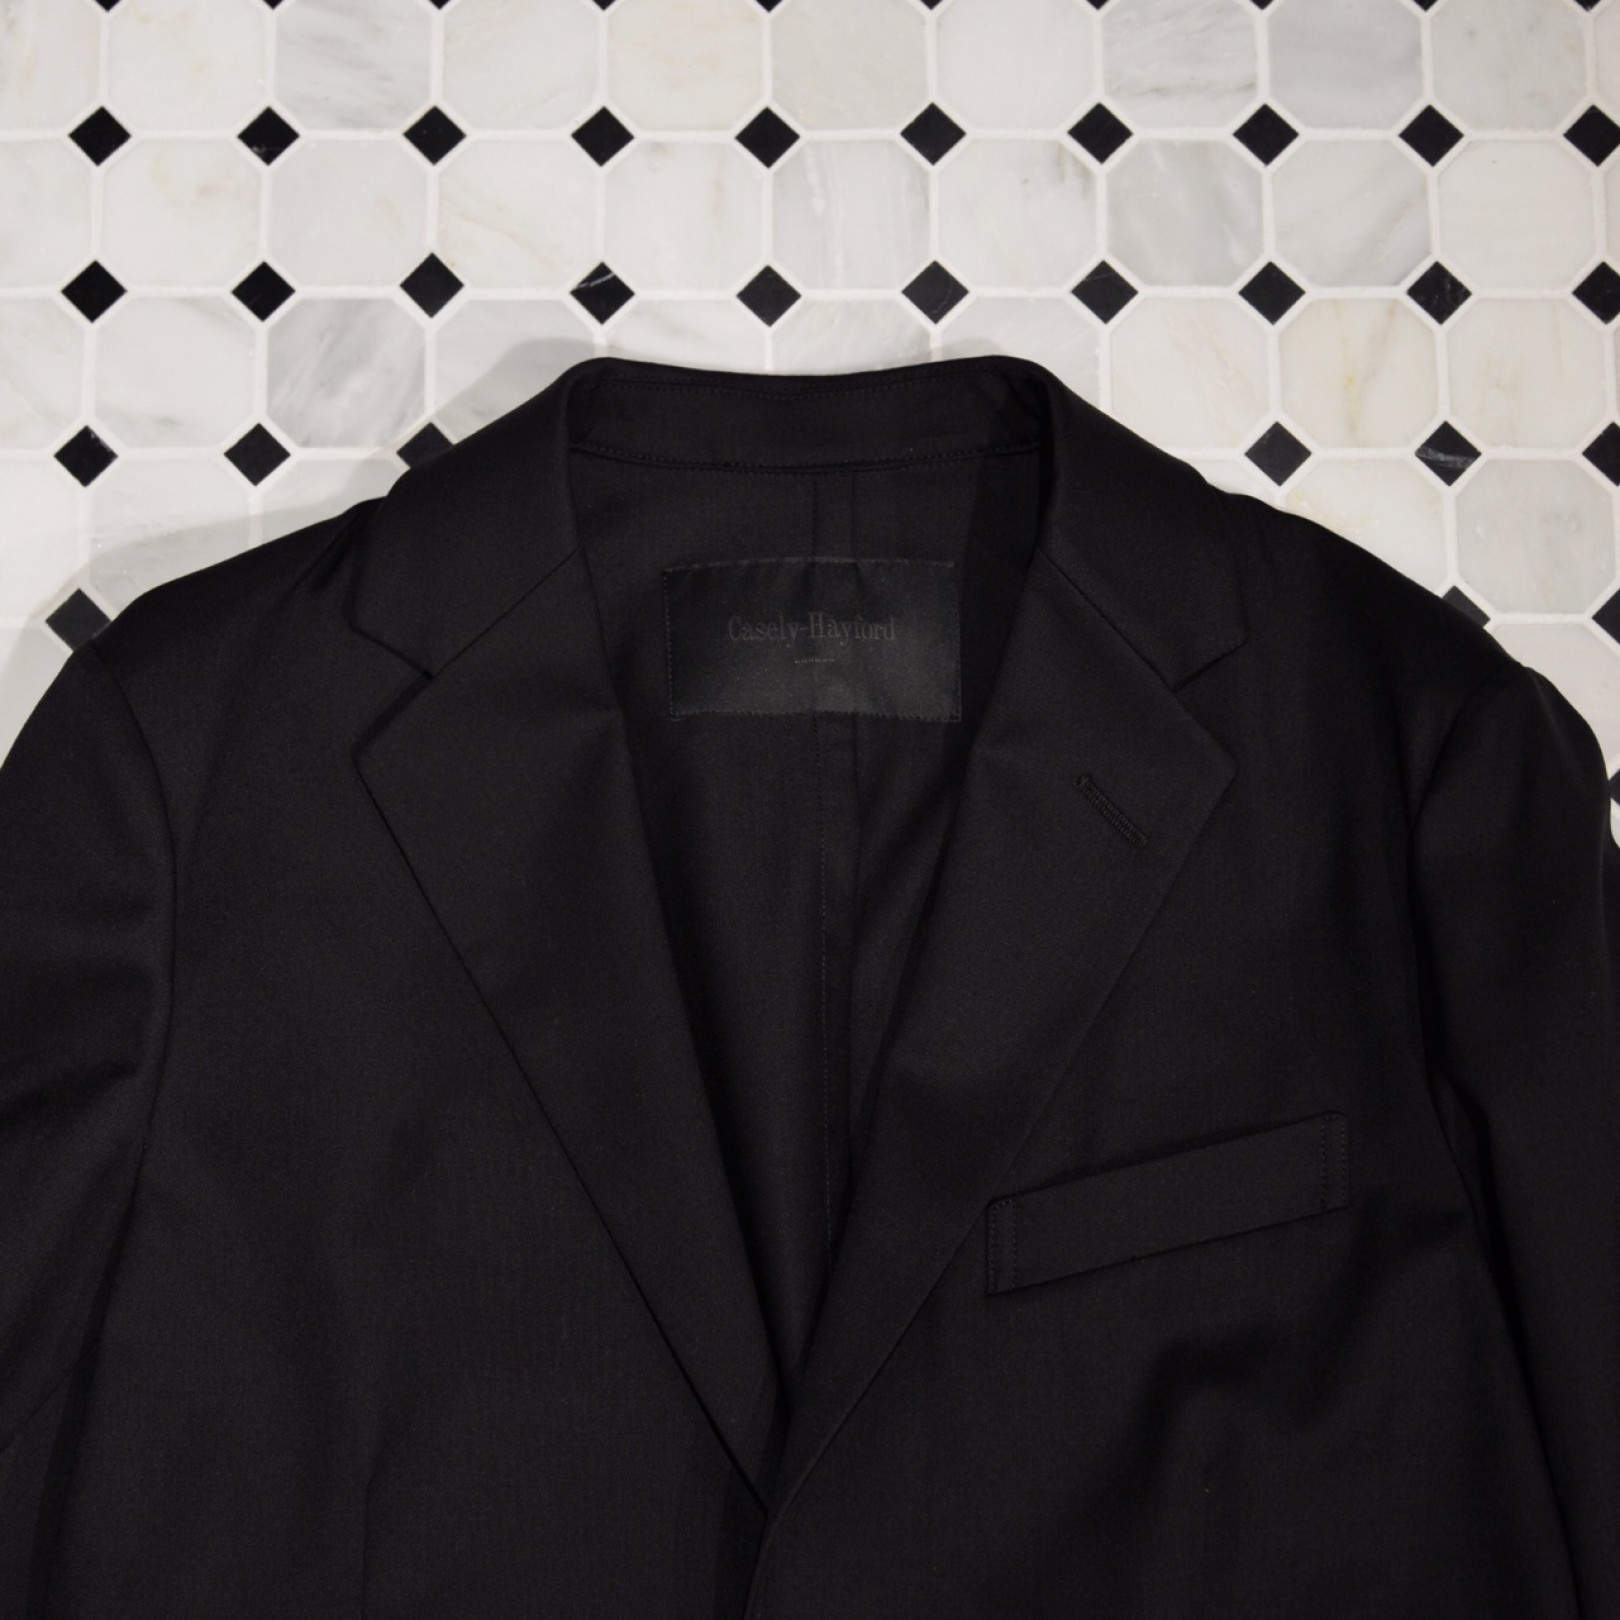 “Casely-Hayford for PORTER”「TRAVEL SUIT」サイズ 36/38（10万円）